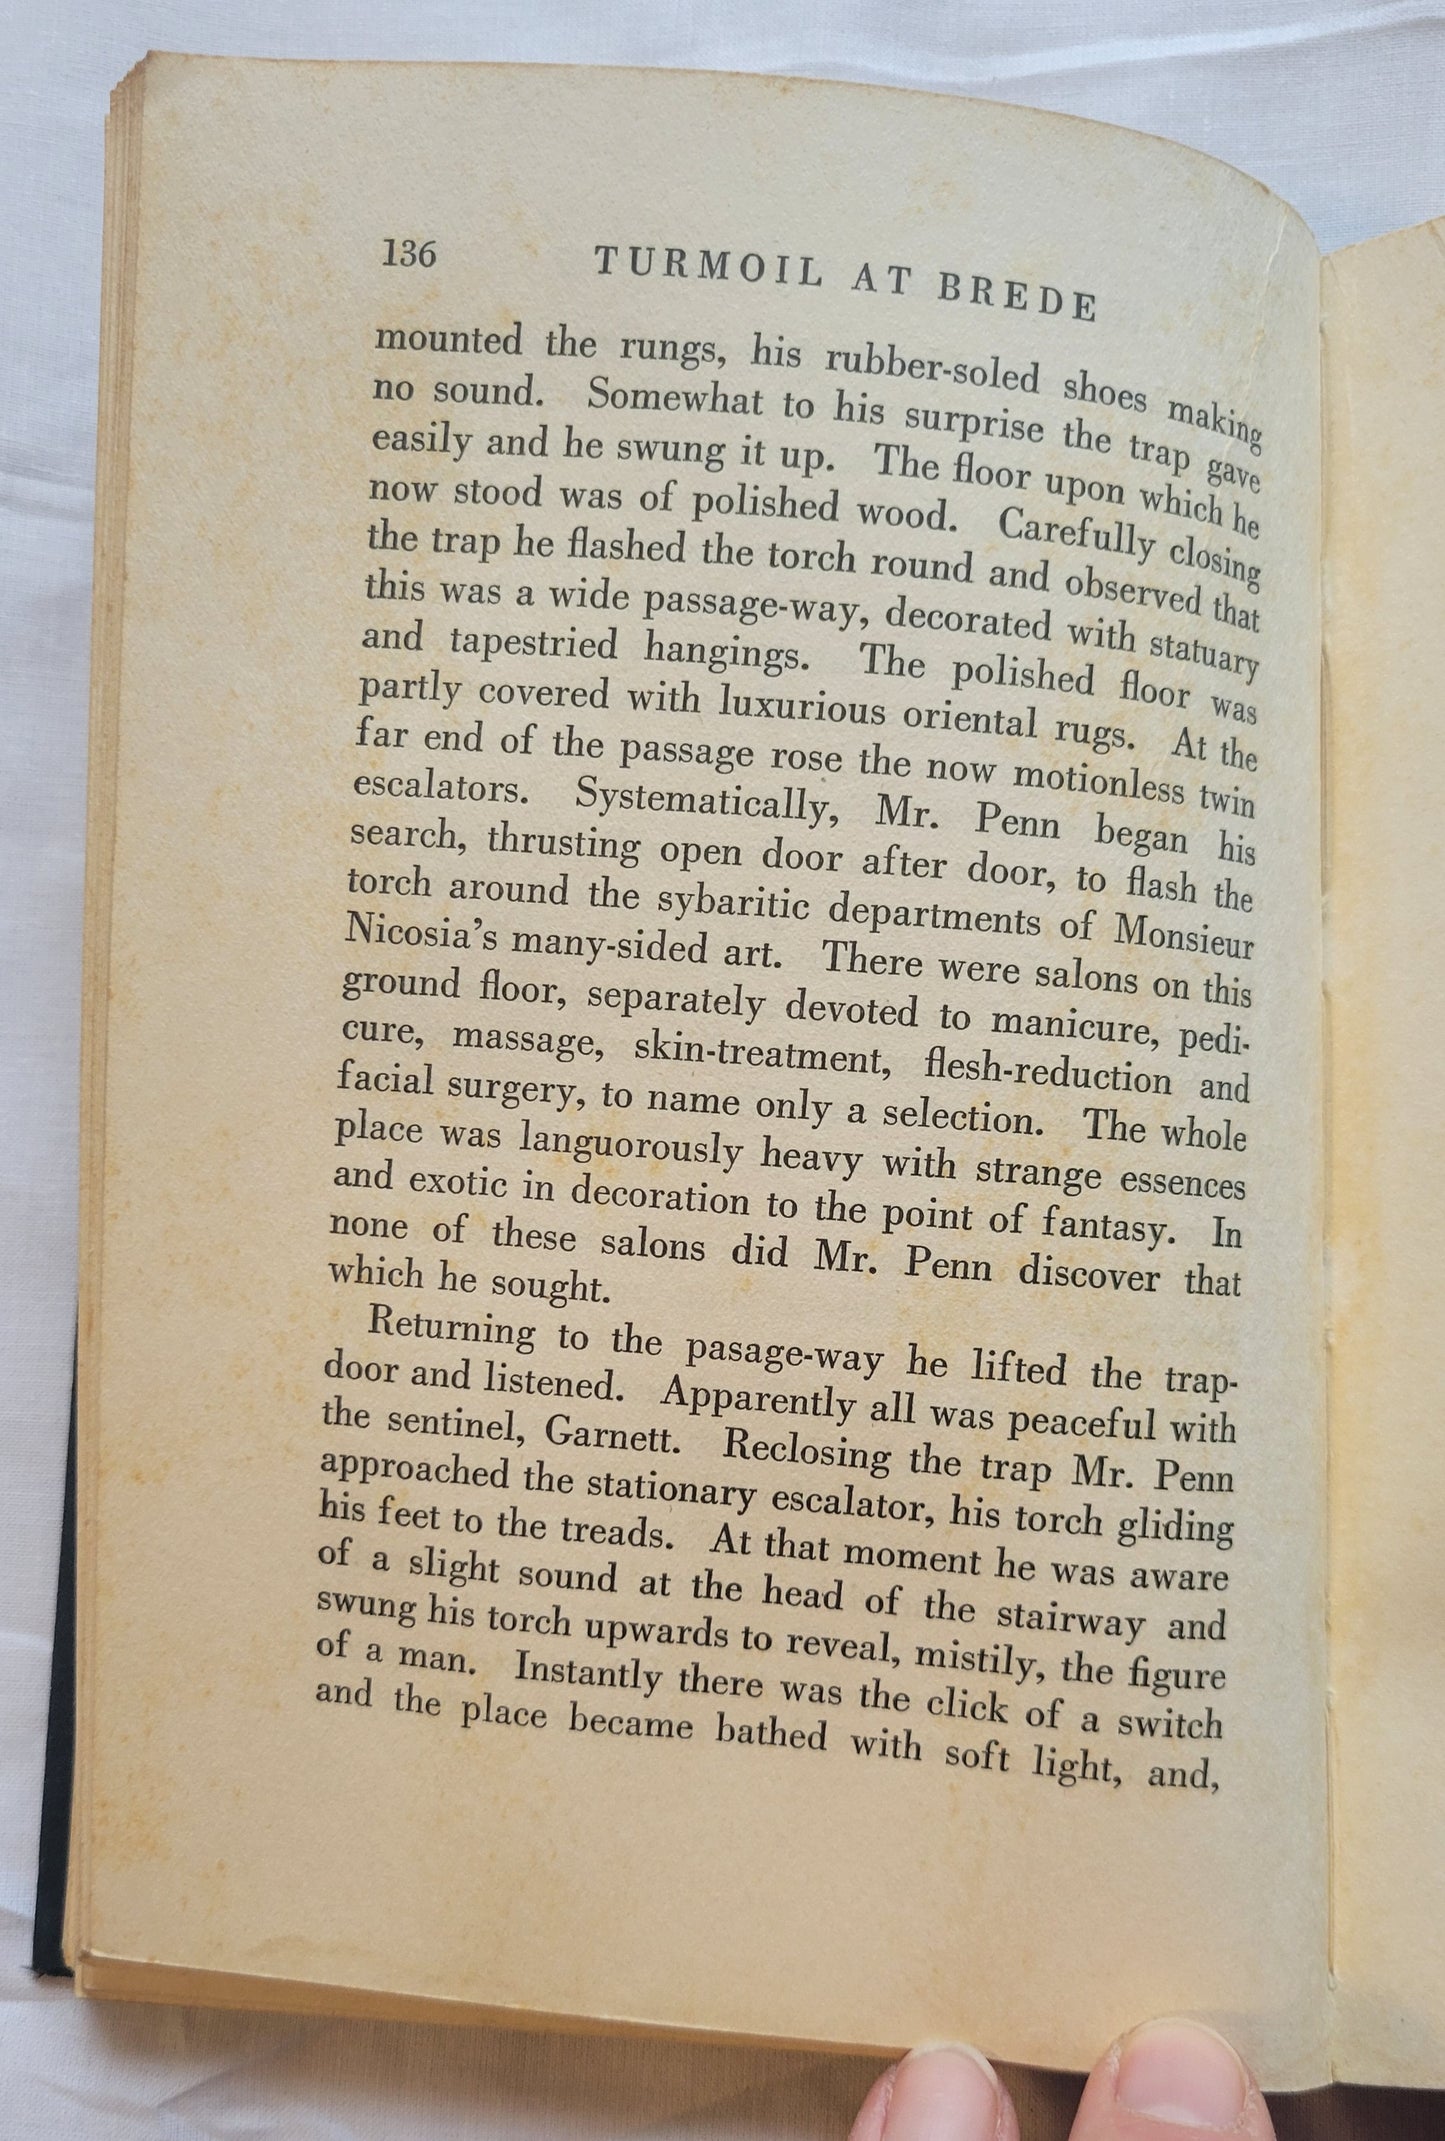 Antique book for sale “Turmoil at Brede, First Edition” by Seldon Truss, published by The Mystery League in 1931. Page 136